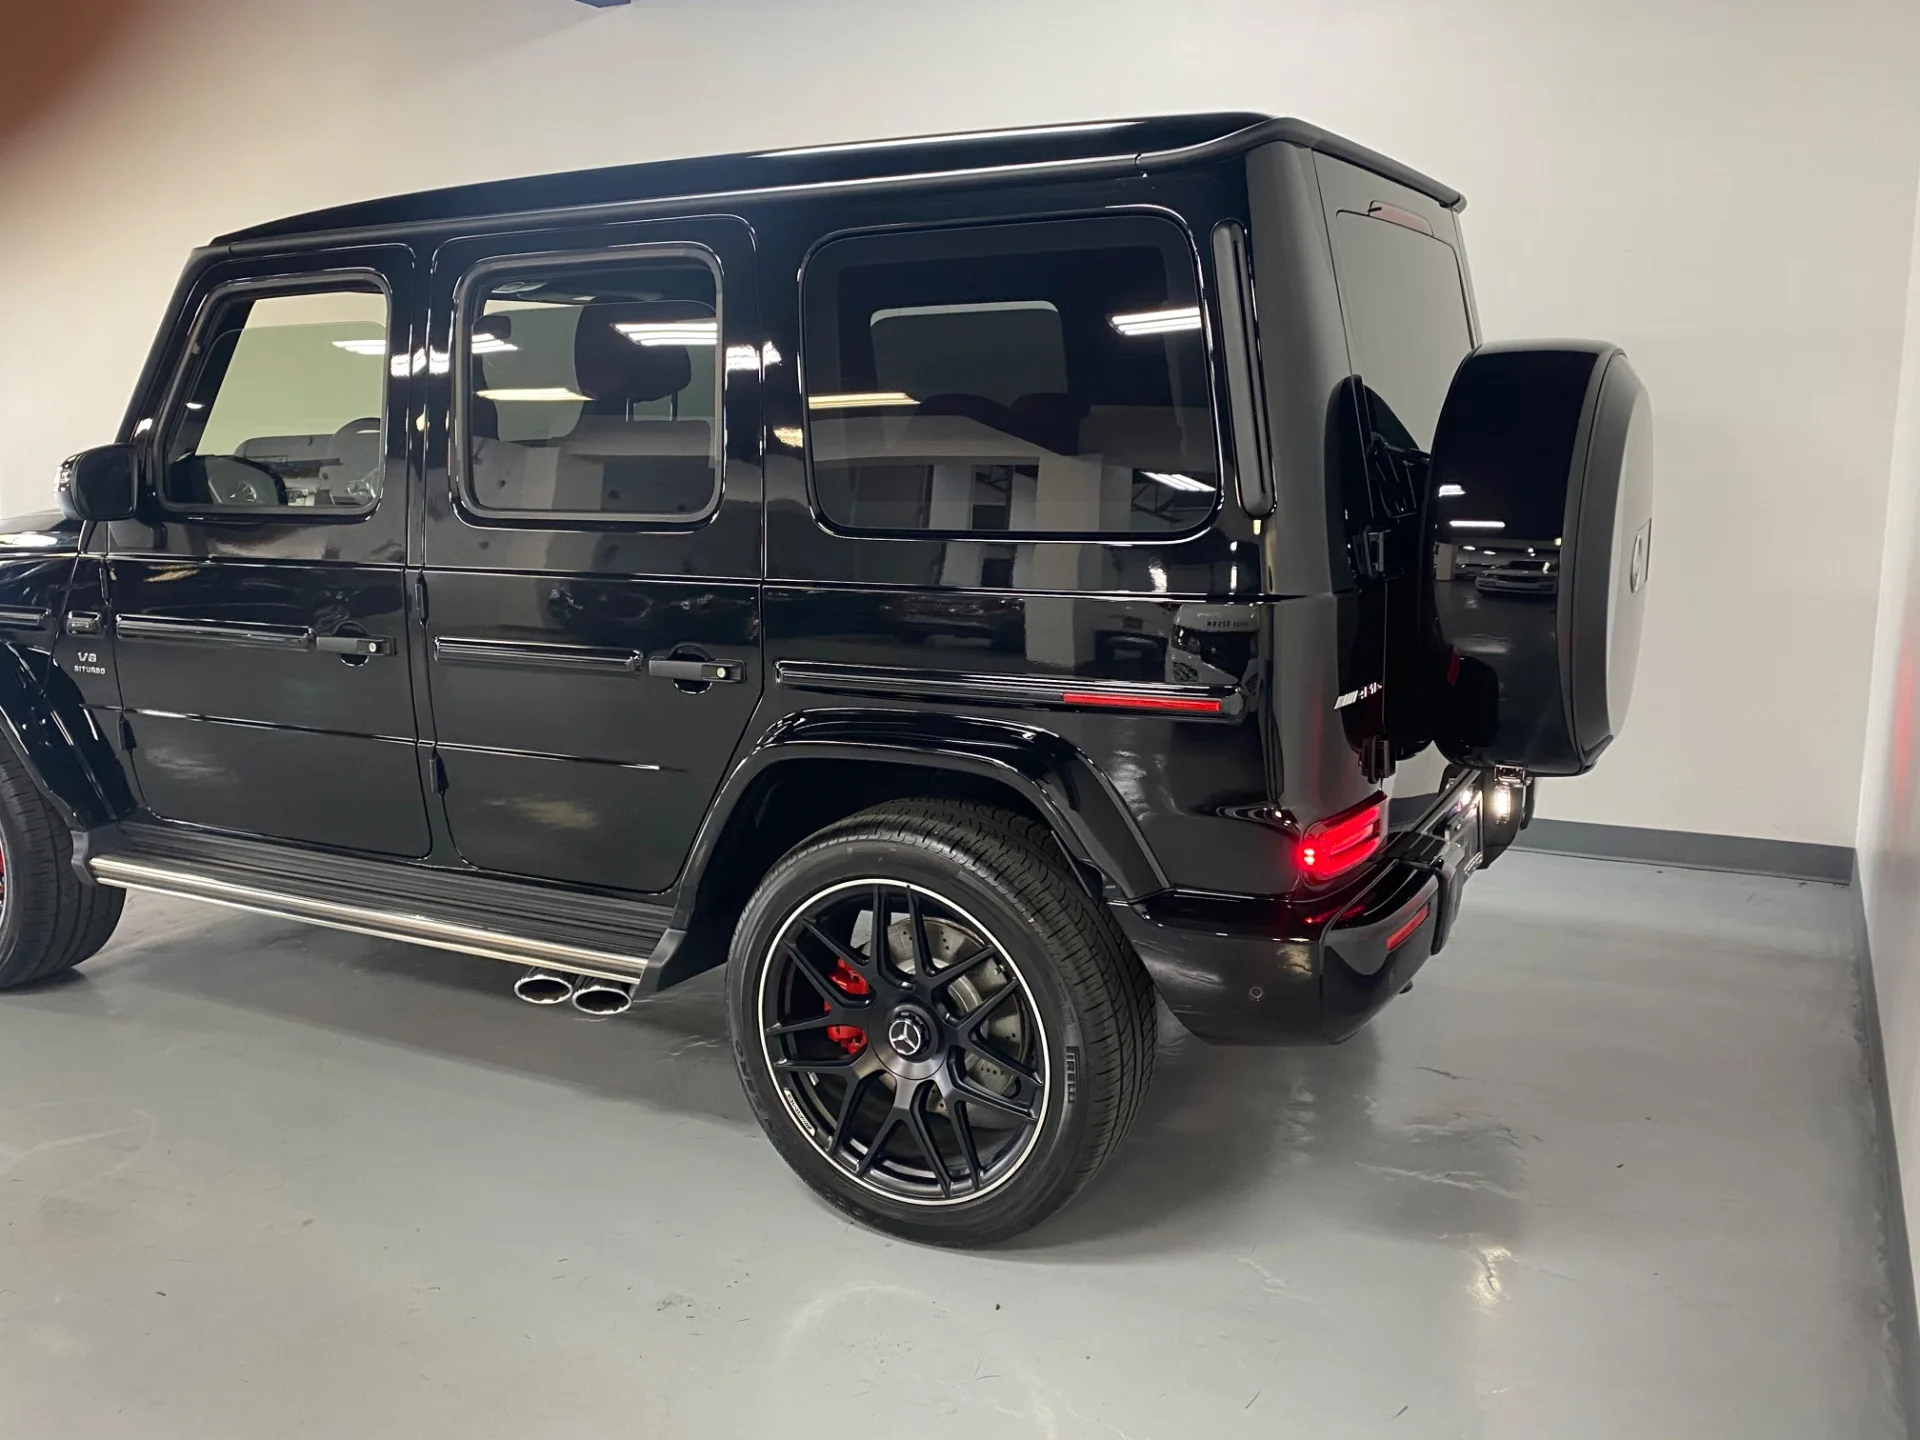 Used SUV 2019 2020 2021 Mercedes amg BenzG63 Used Cars MERCEDES G-Class 63 AMG